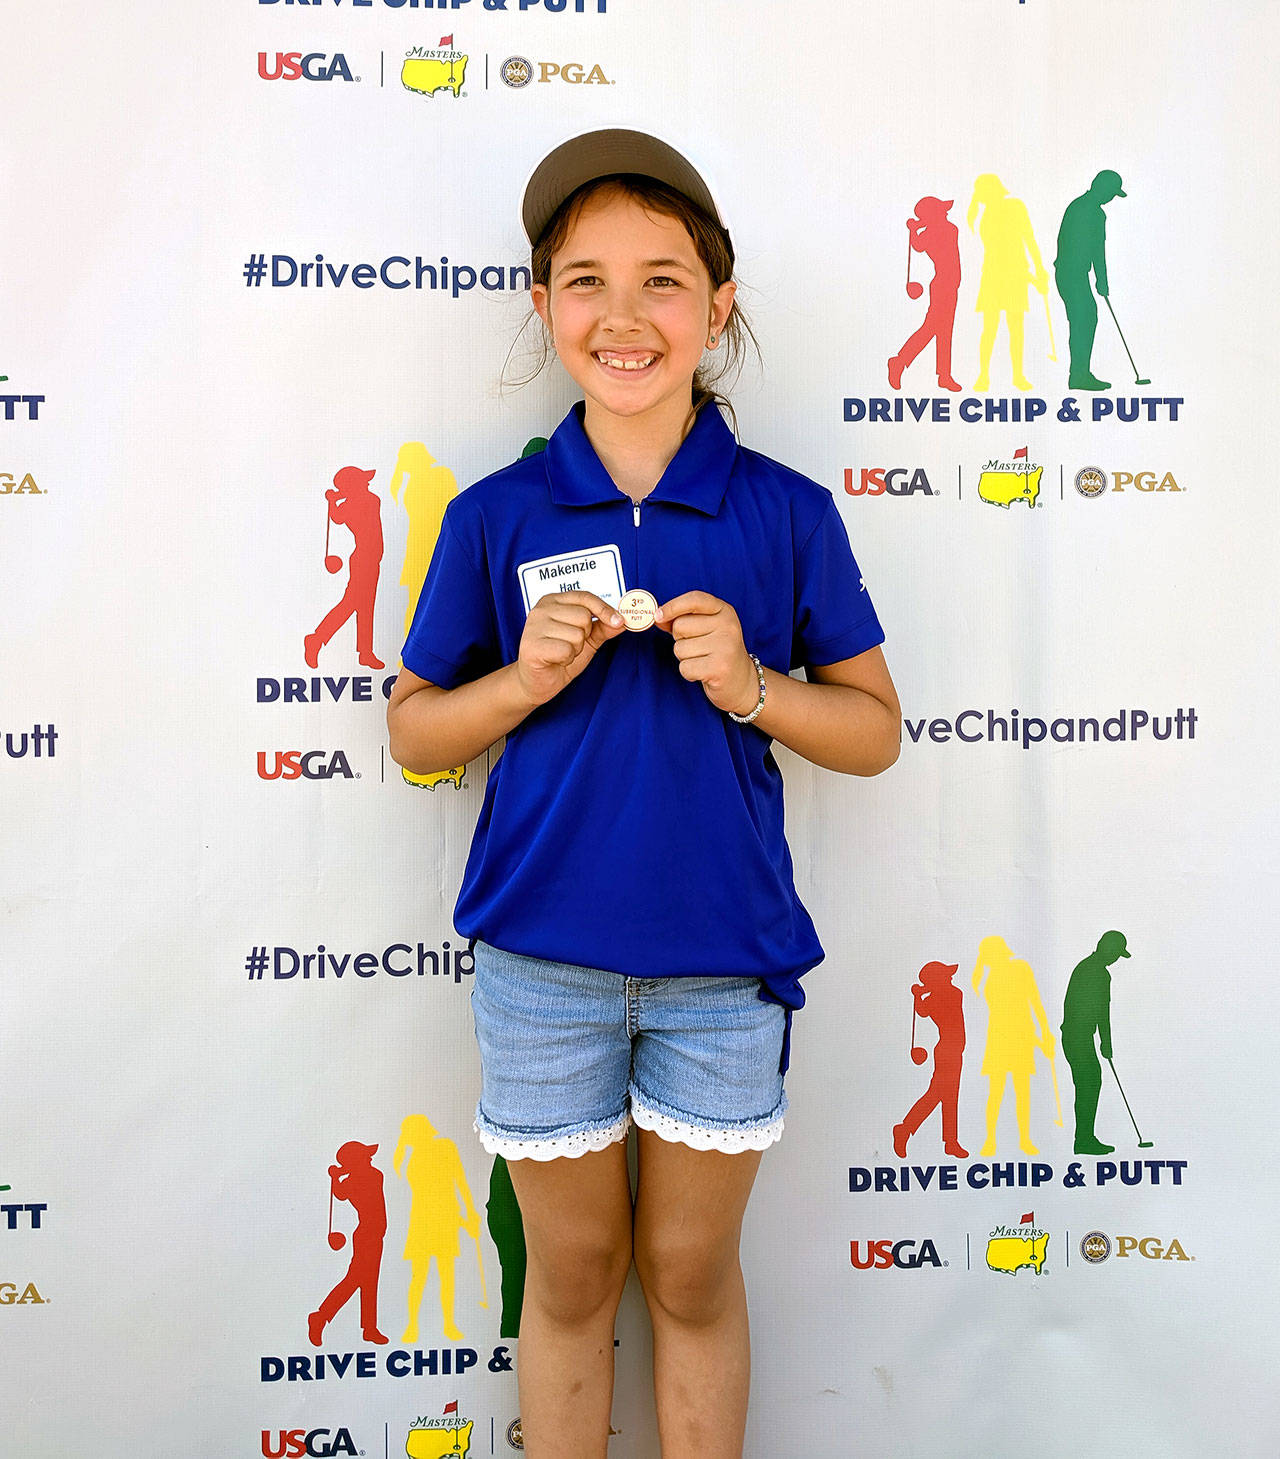 Grays Harbor Junior Golf’s Makenzie Hart holds up her bronze medal after taking third in the Drive, Chip & Putt competition on Aug. 5. Hart’s third-place finish was helped by her sinking a 6-foot putt. (Submitted Photo)